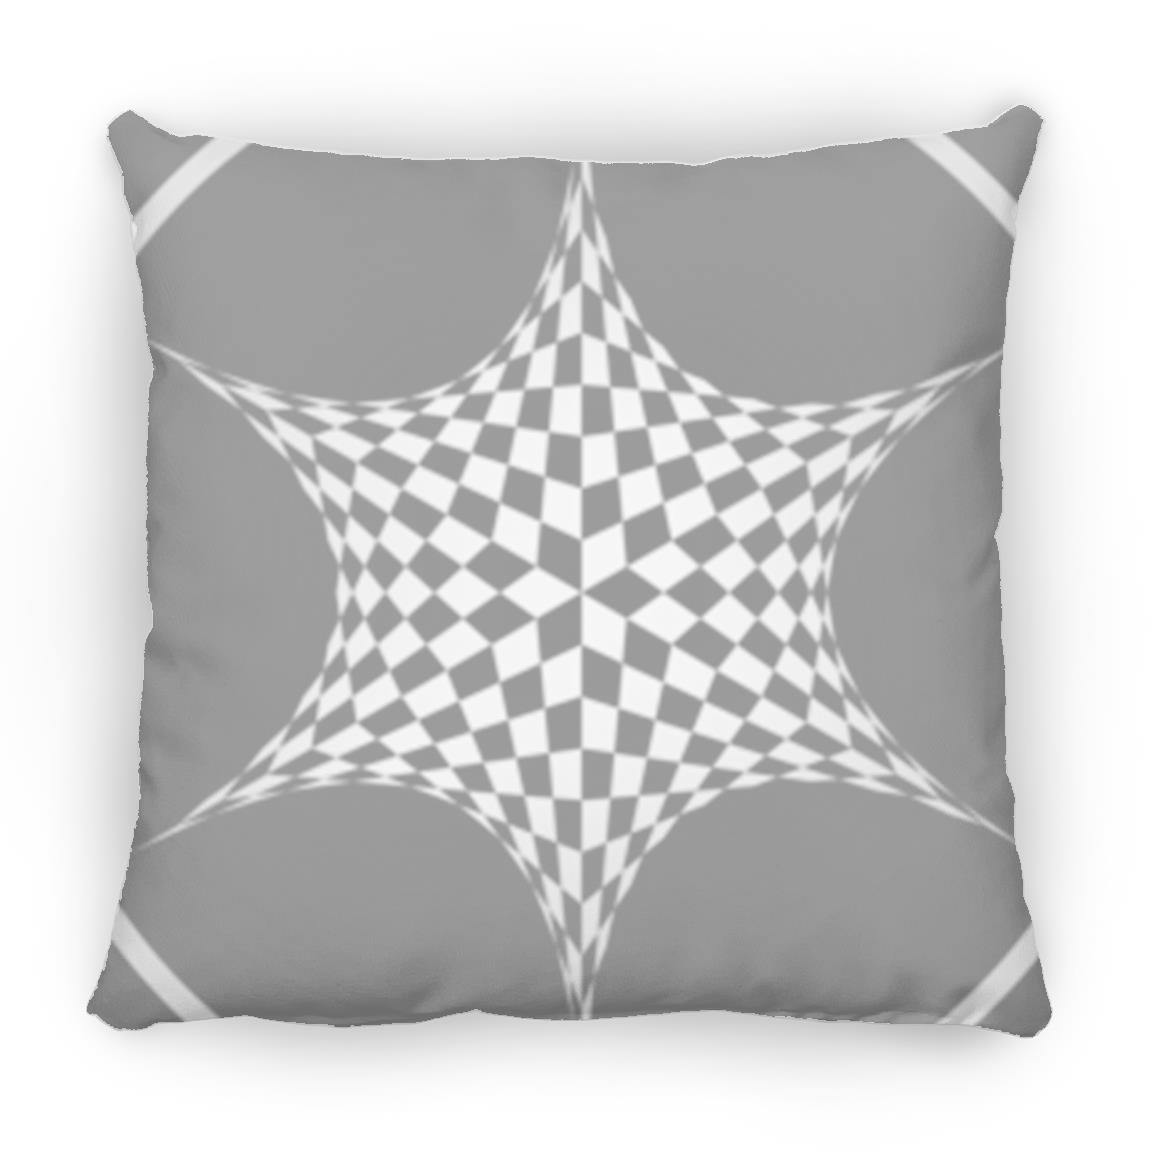 Crop Circle Pillow - Blowingstone Hill - Shapes of Wisdom